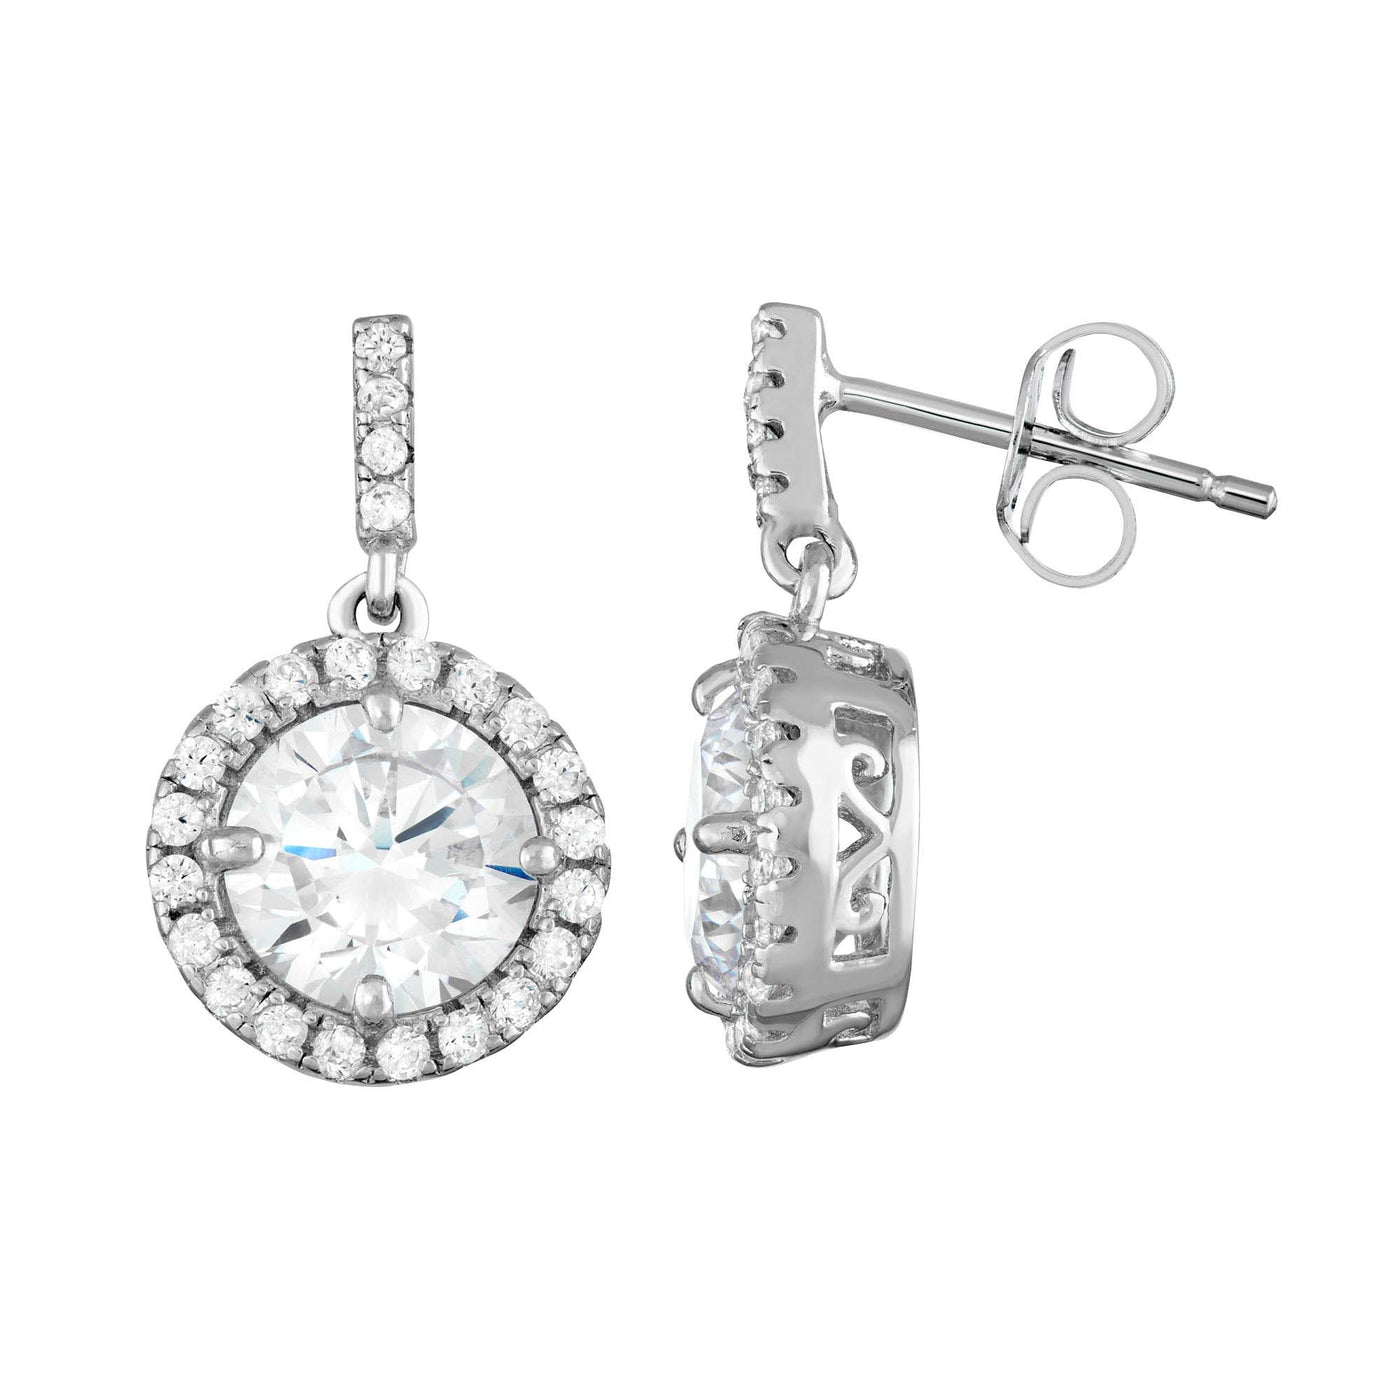 Rebecca Sloane Silver Circle With Faceted White CZ Earrings